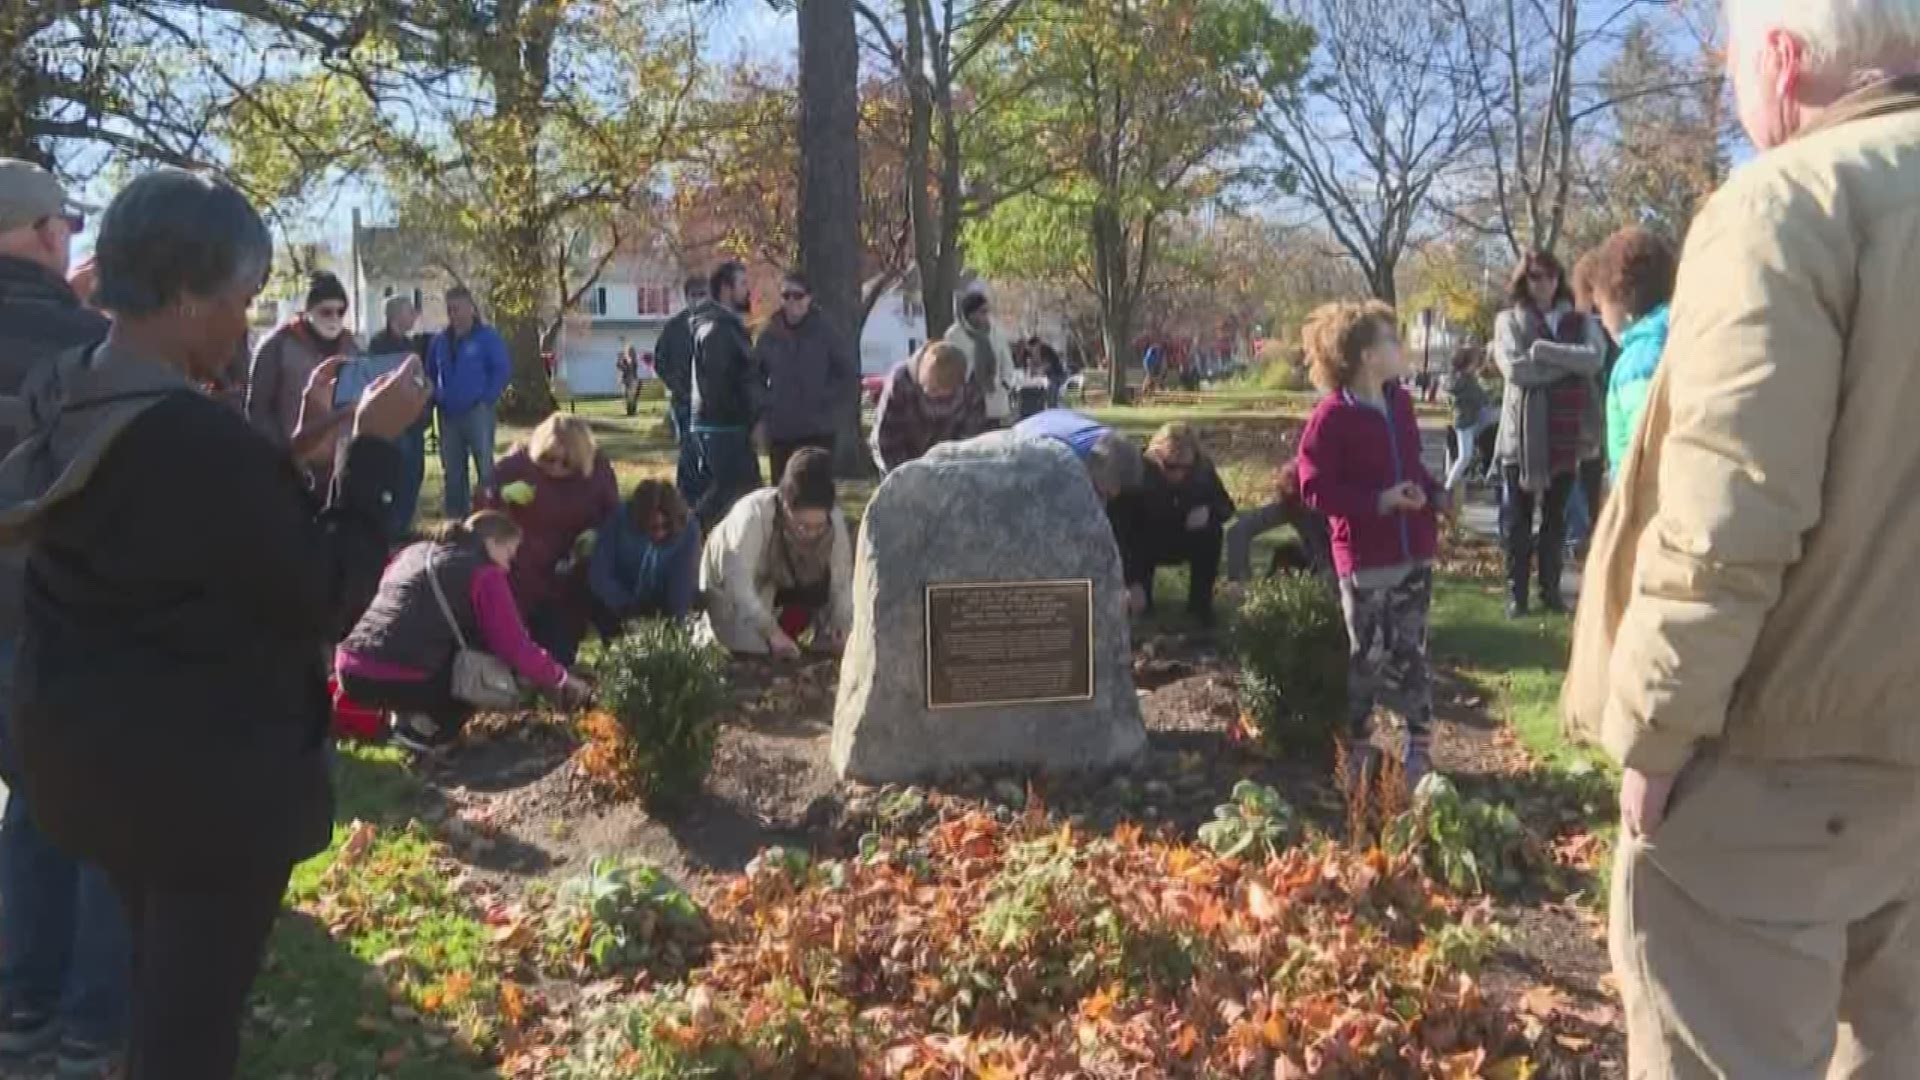 Dozens gathered to remember the victims at a permanent memorial at Longfellow park.